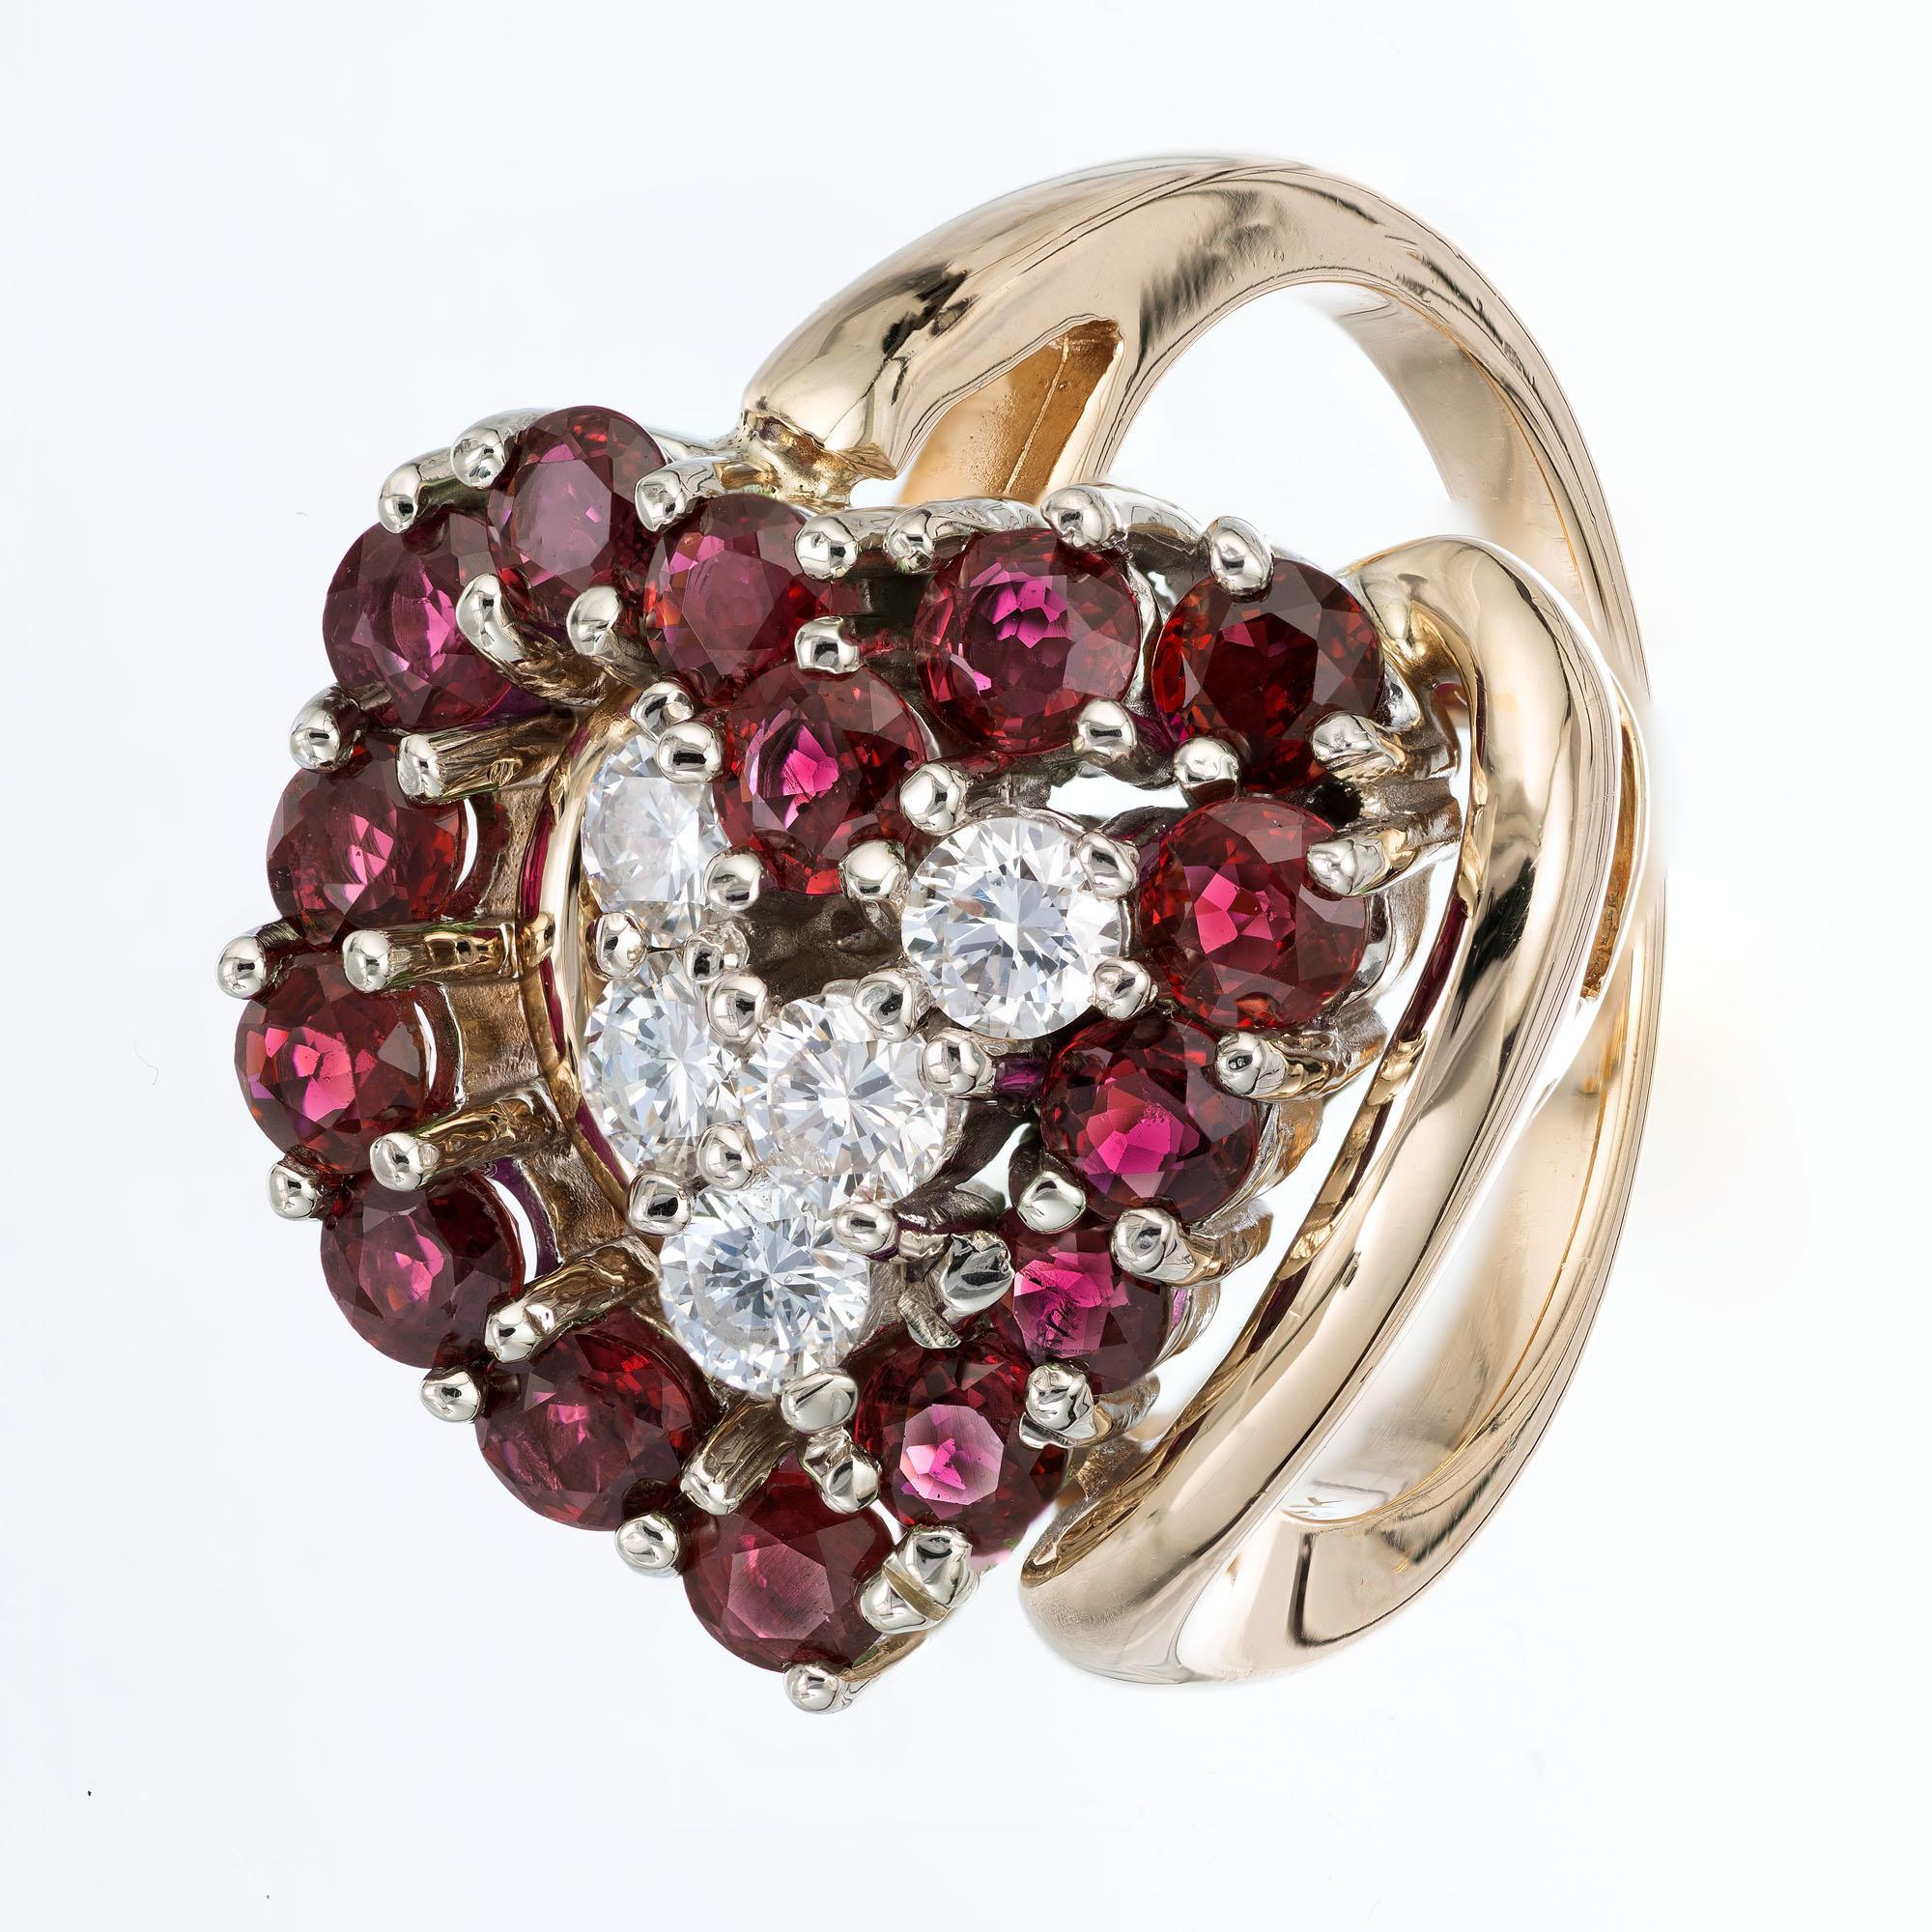  Heart shaped Garnet and Diamond ring. Heart shape on its side design made up of round Garnets with round brilliant cut accent Diamonds, in a 14k yellow gold setting.  

 15 round Rhodolite Garnets, 3.0mm 
 5 round brilliant cut Diamonds, approx.